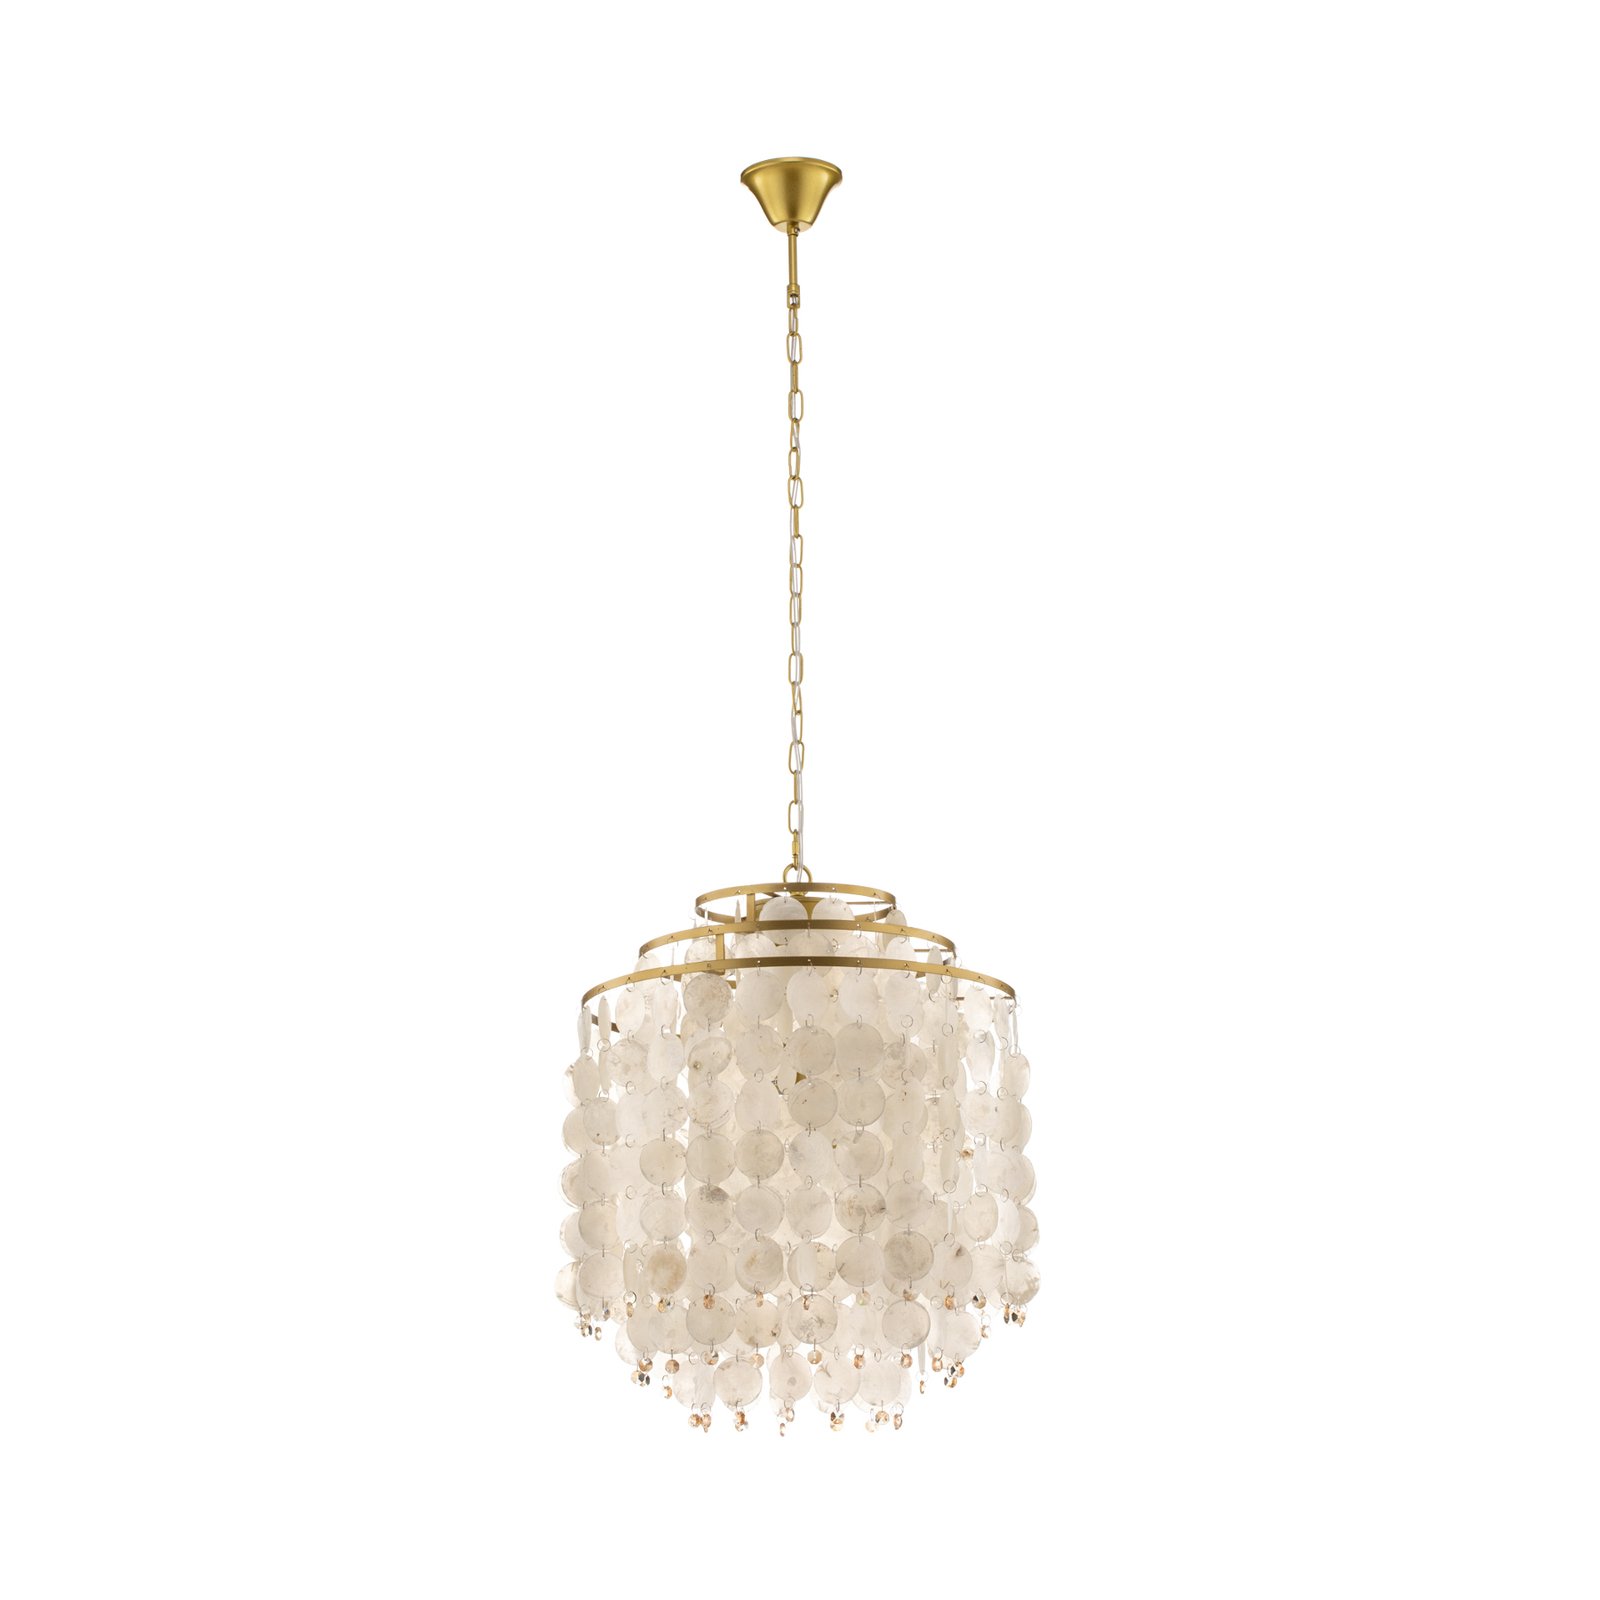 Ruben pendant light with lampshade made of mother-of-pearl discs